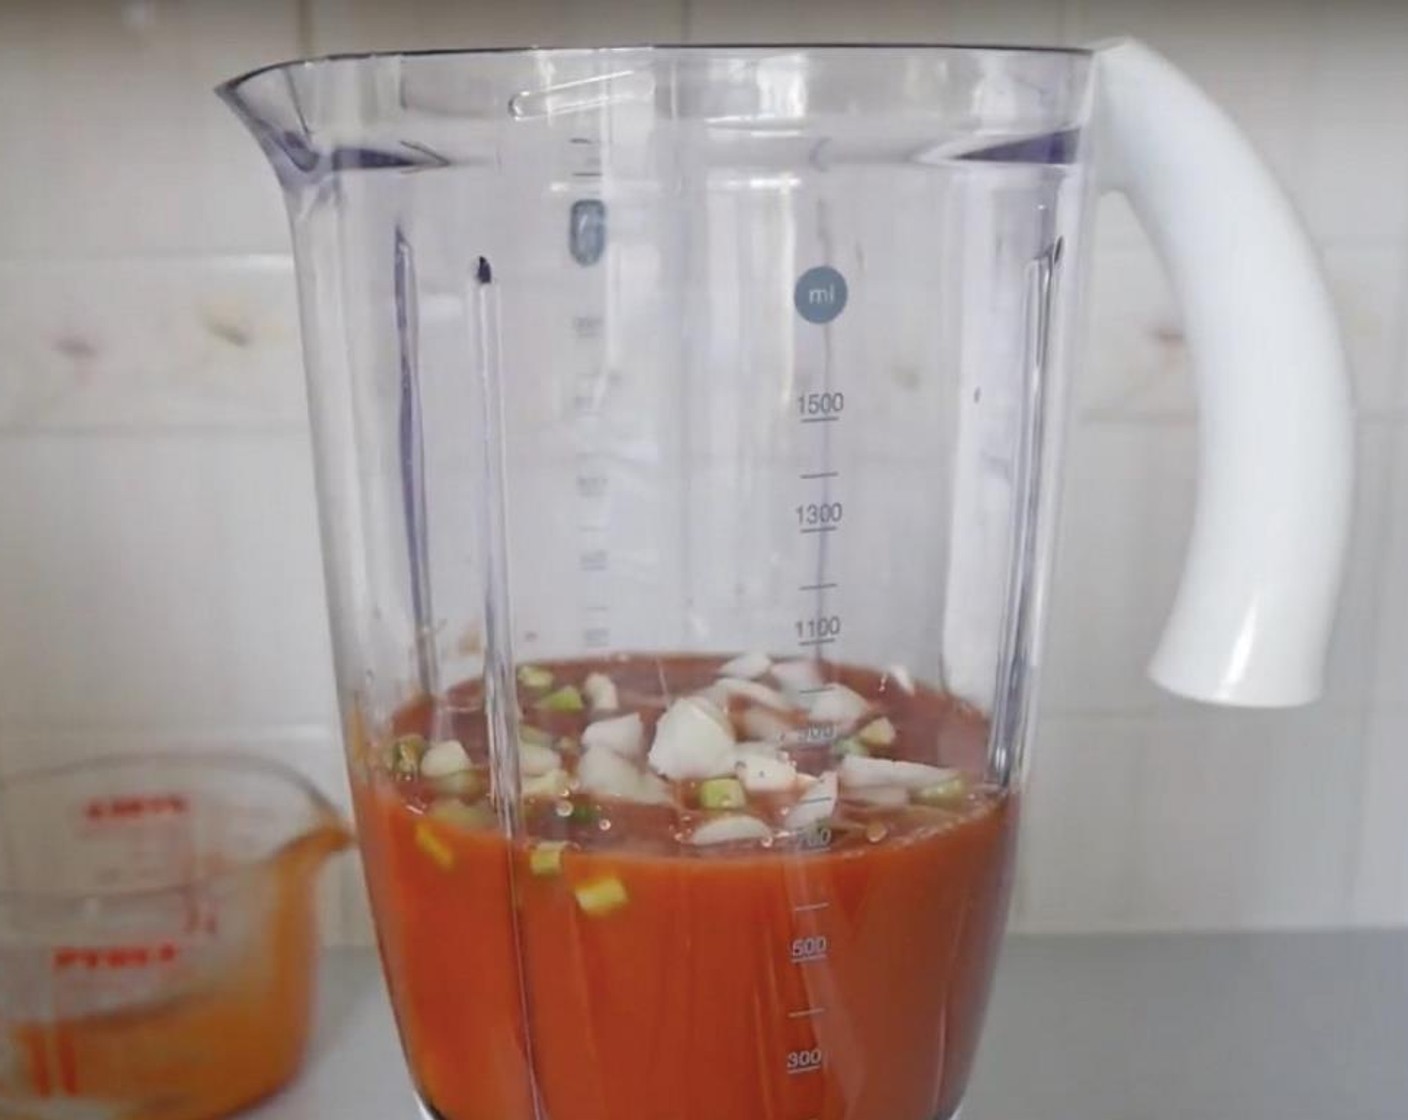 step 2 In the meantime, in a blender, blitz the Tomato Passata (2 cups), Scallion (1 bunch), Onion (1), Garlic (4 cloves), Red Chili Pepper (1/2), and Green Bell Pepper (1/2).